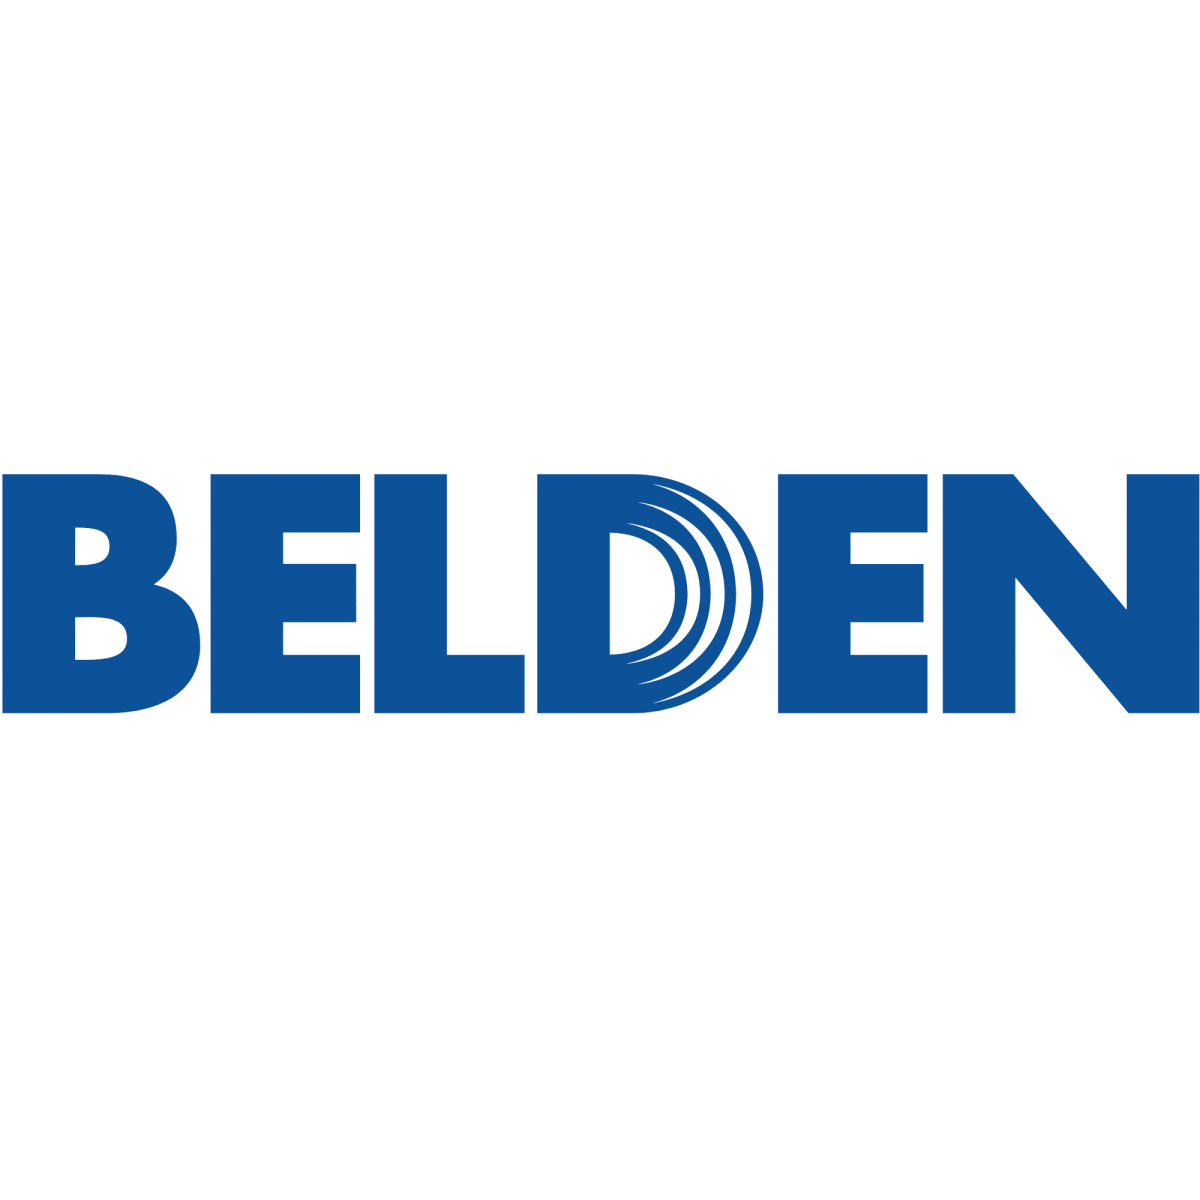 Belden Canada has been fined $70,.000 after a worker was injured in Feb. 2018.